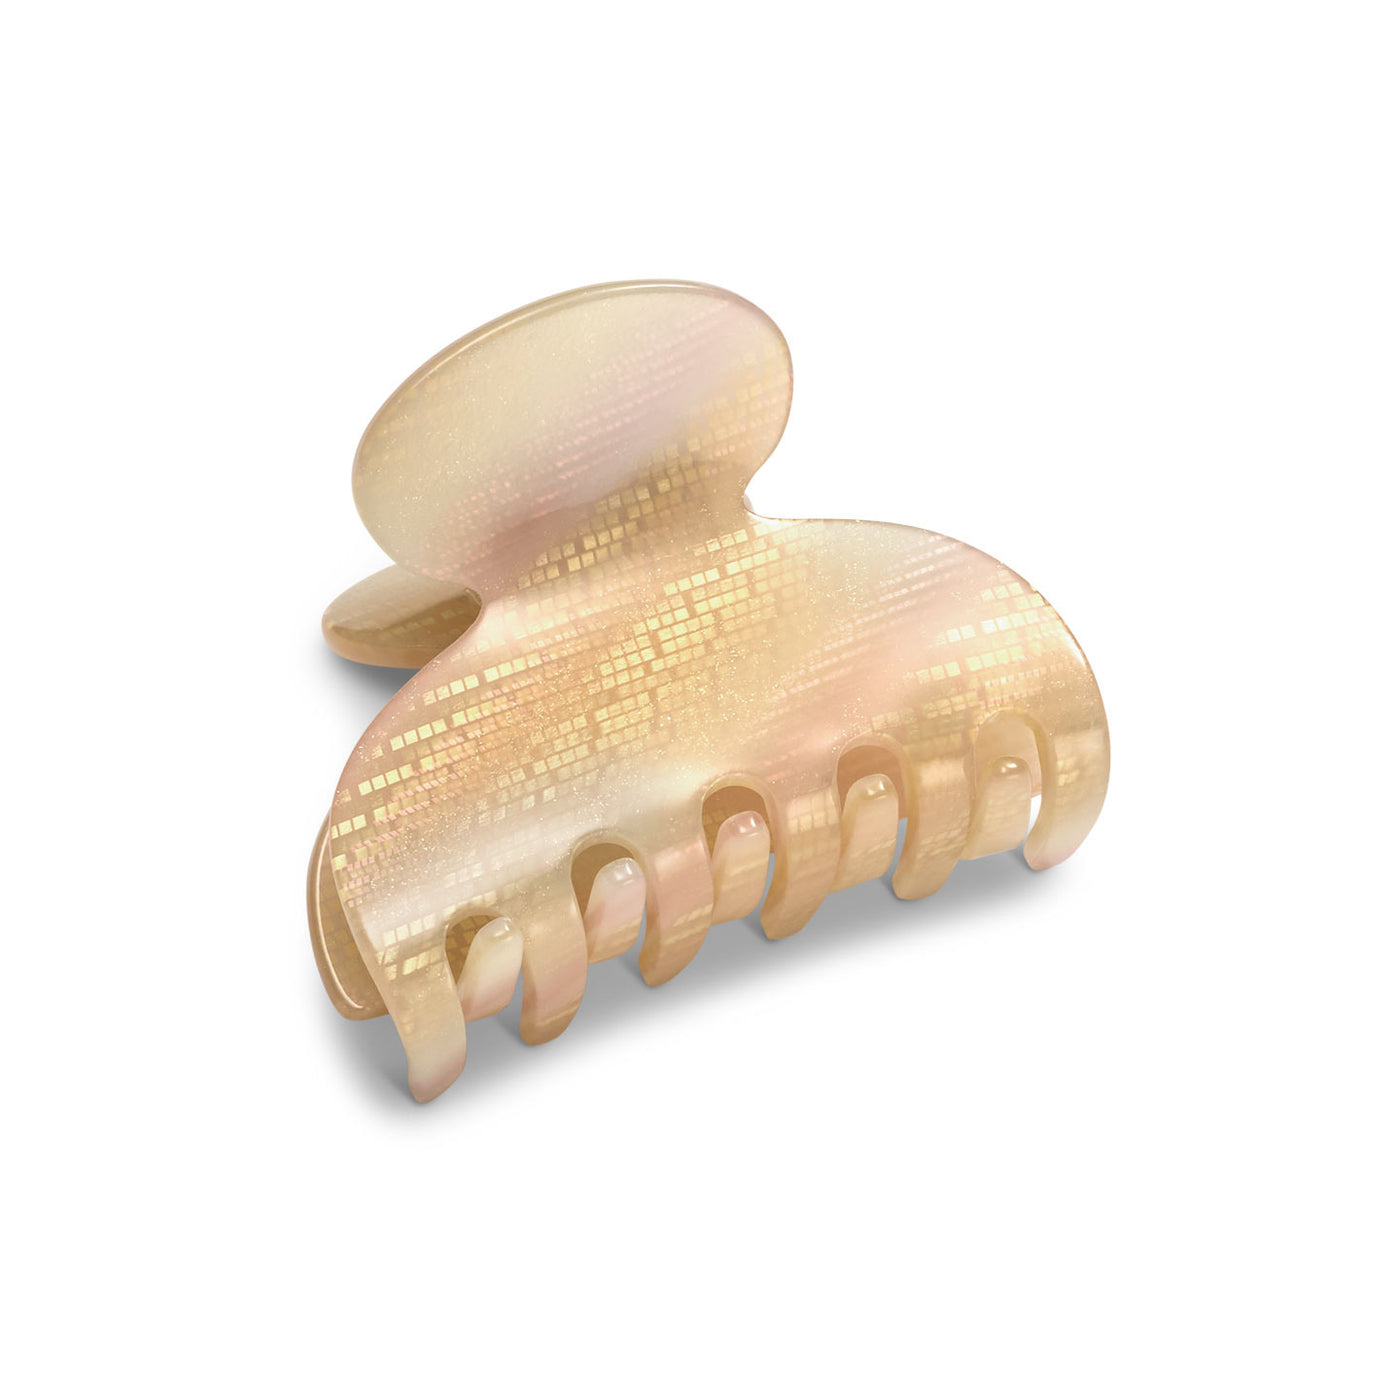 Midsize Curved Verona Hair Claw made of Rhodoïd Cellulose Acetate